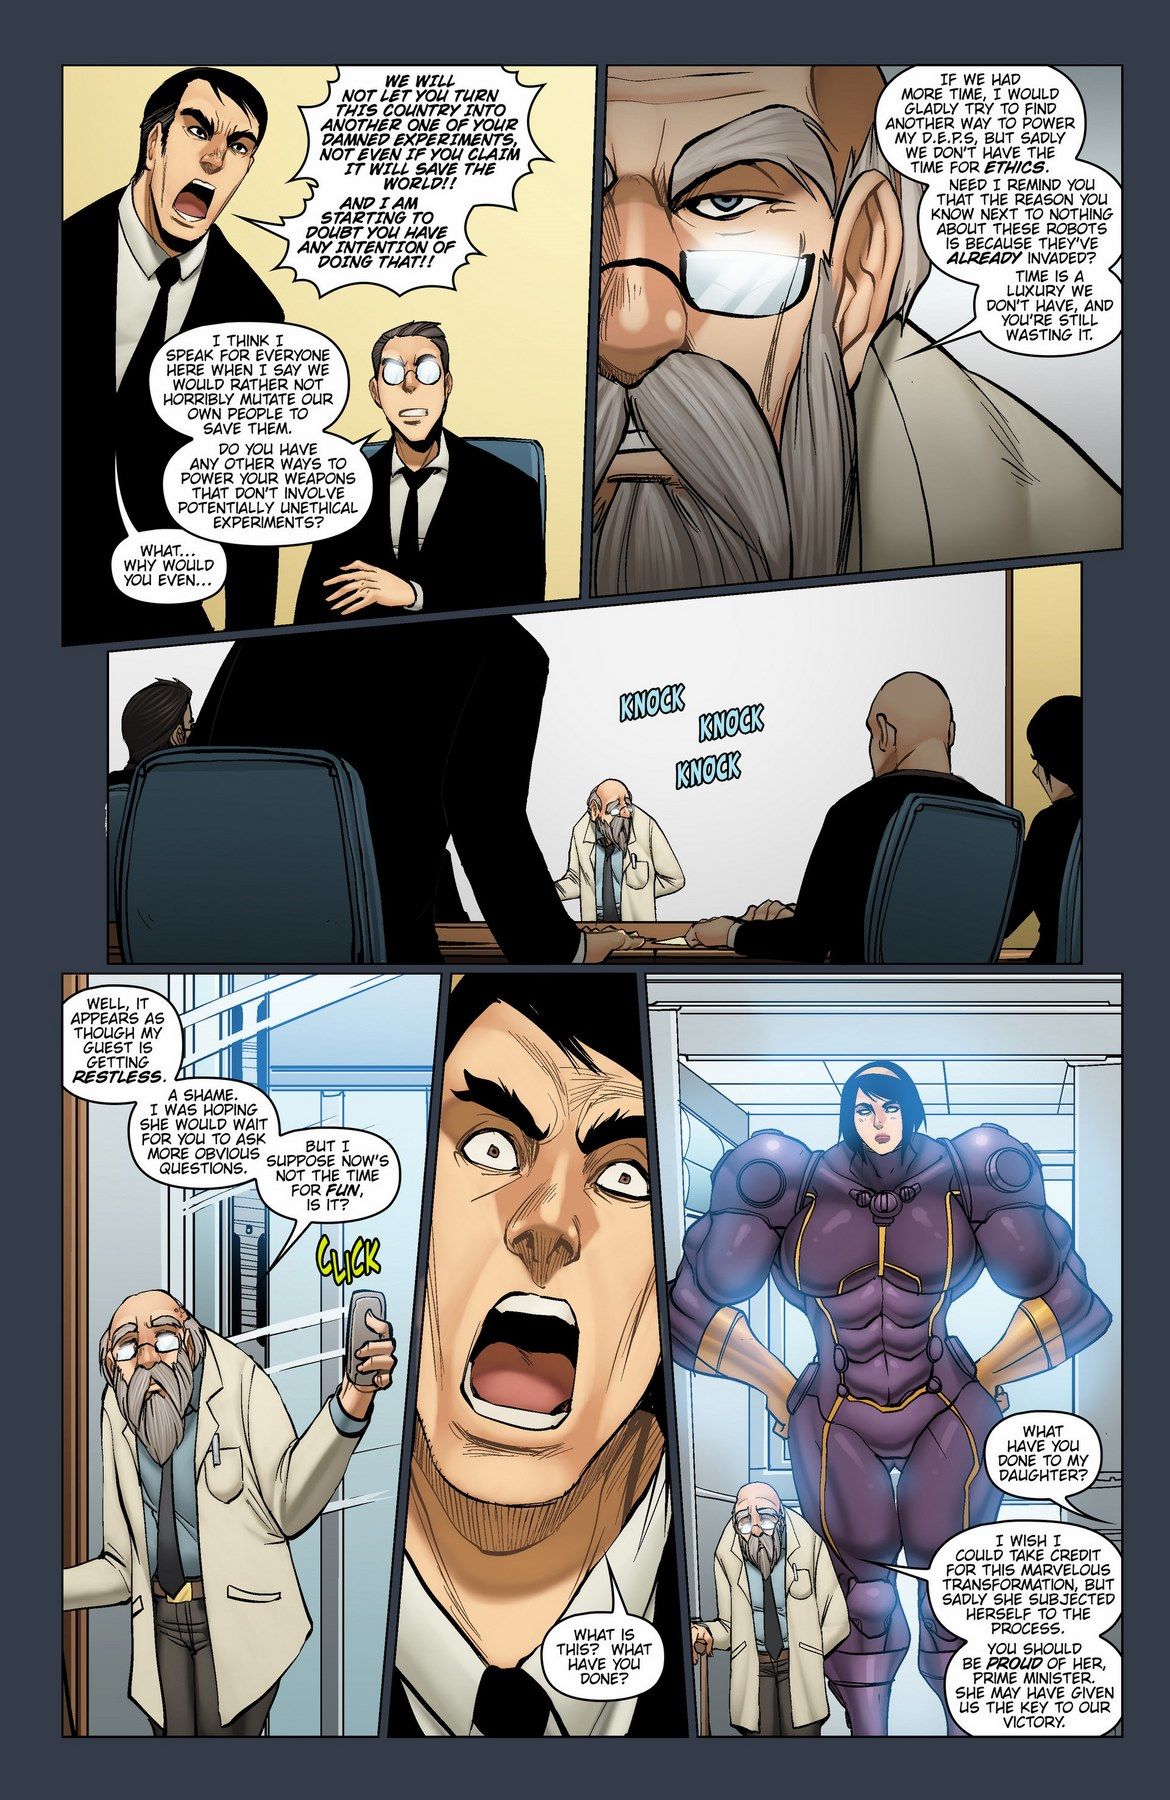 Assimilated Issue 3 MuscleFan page 7